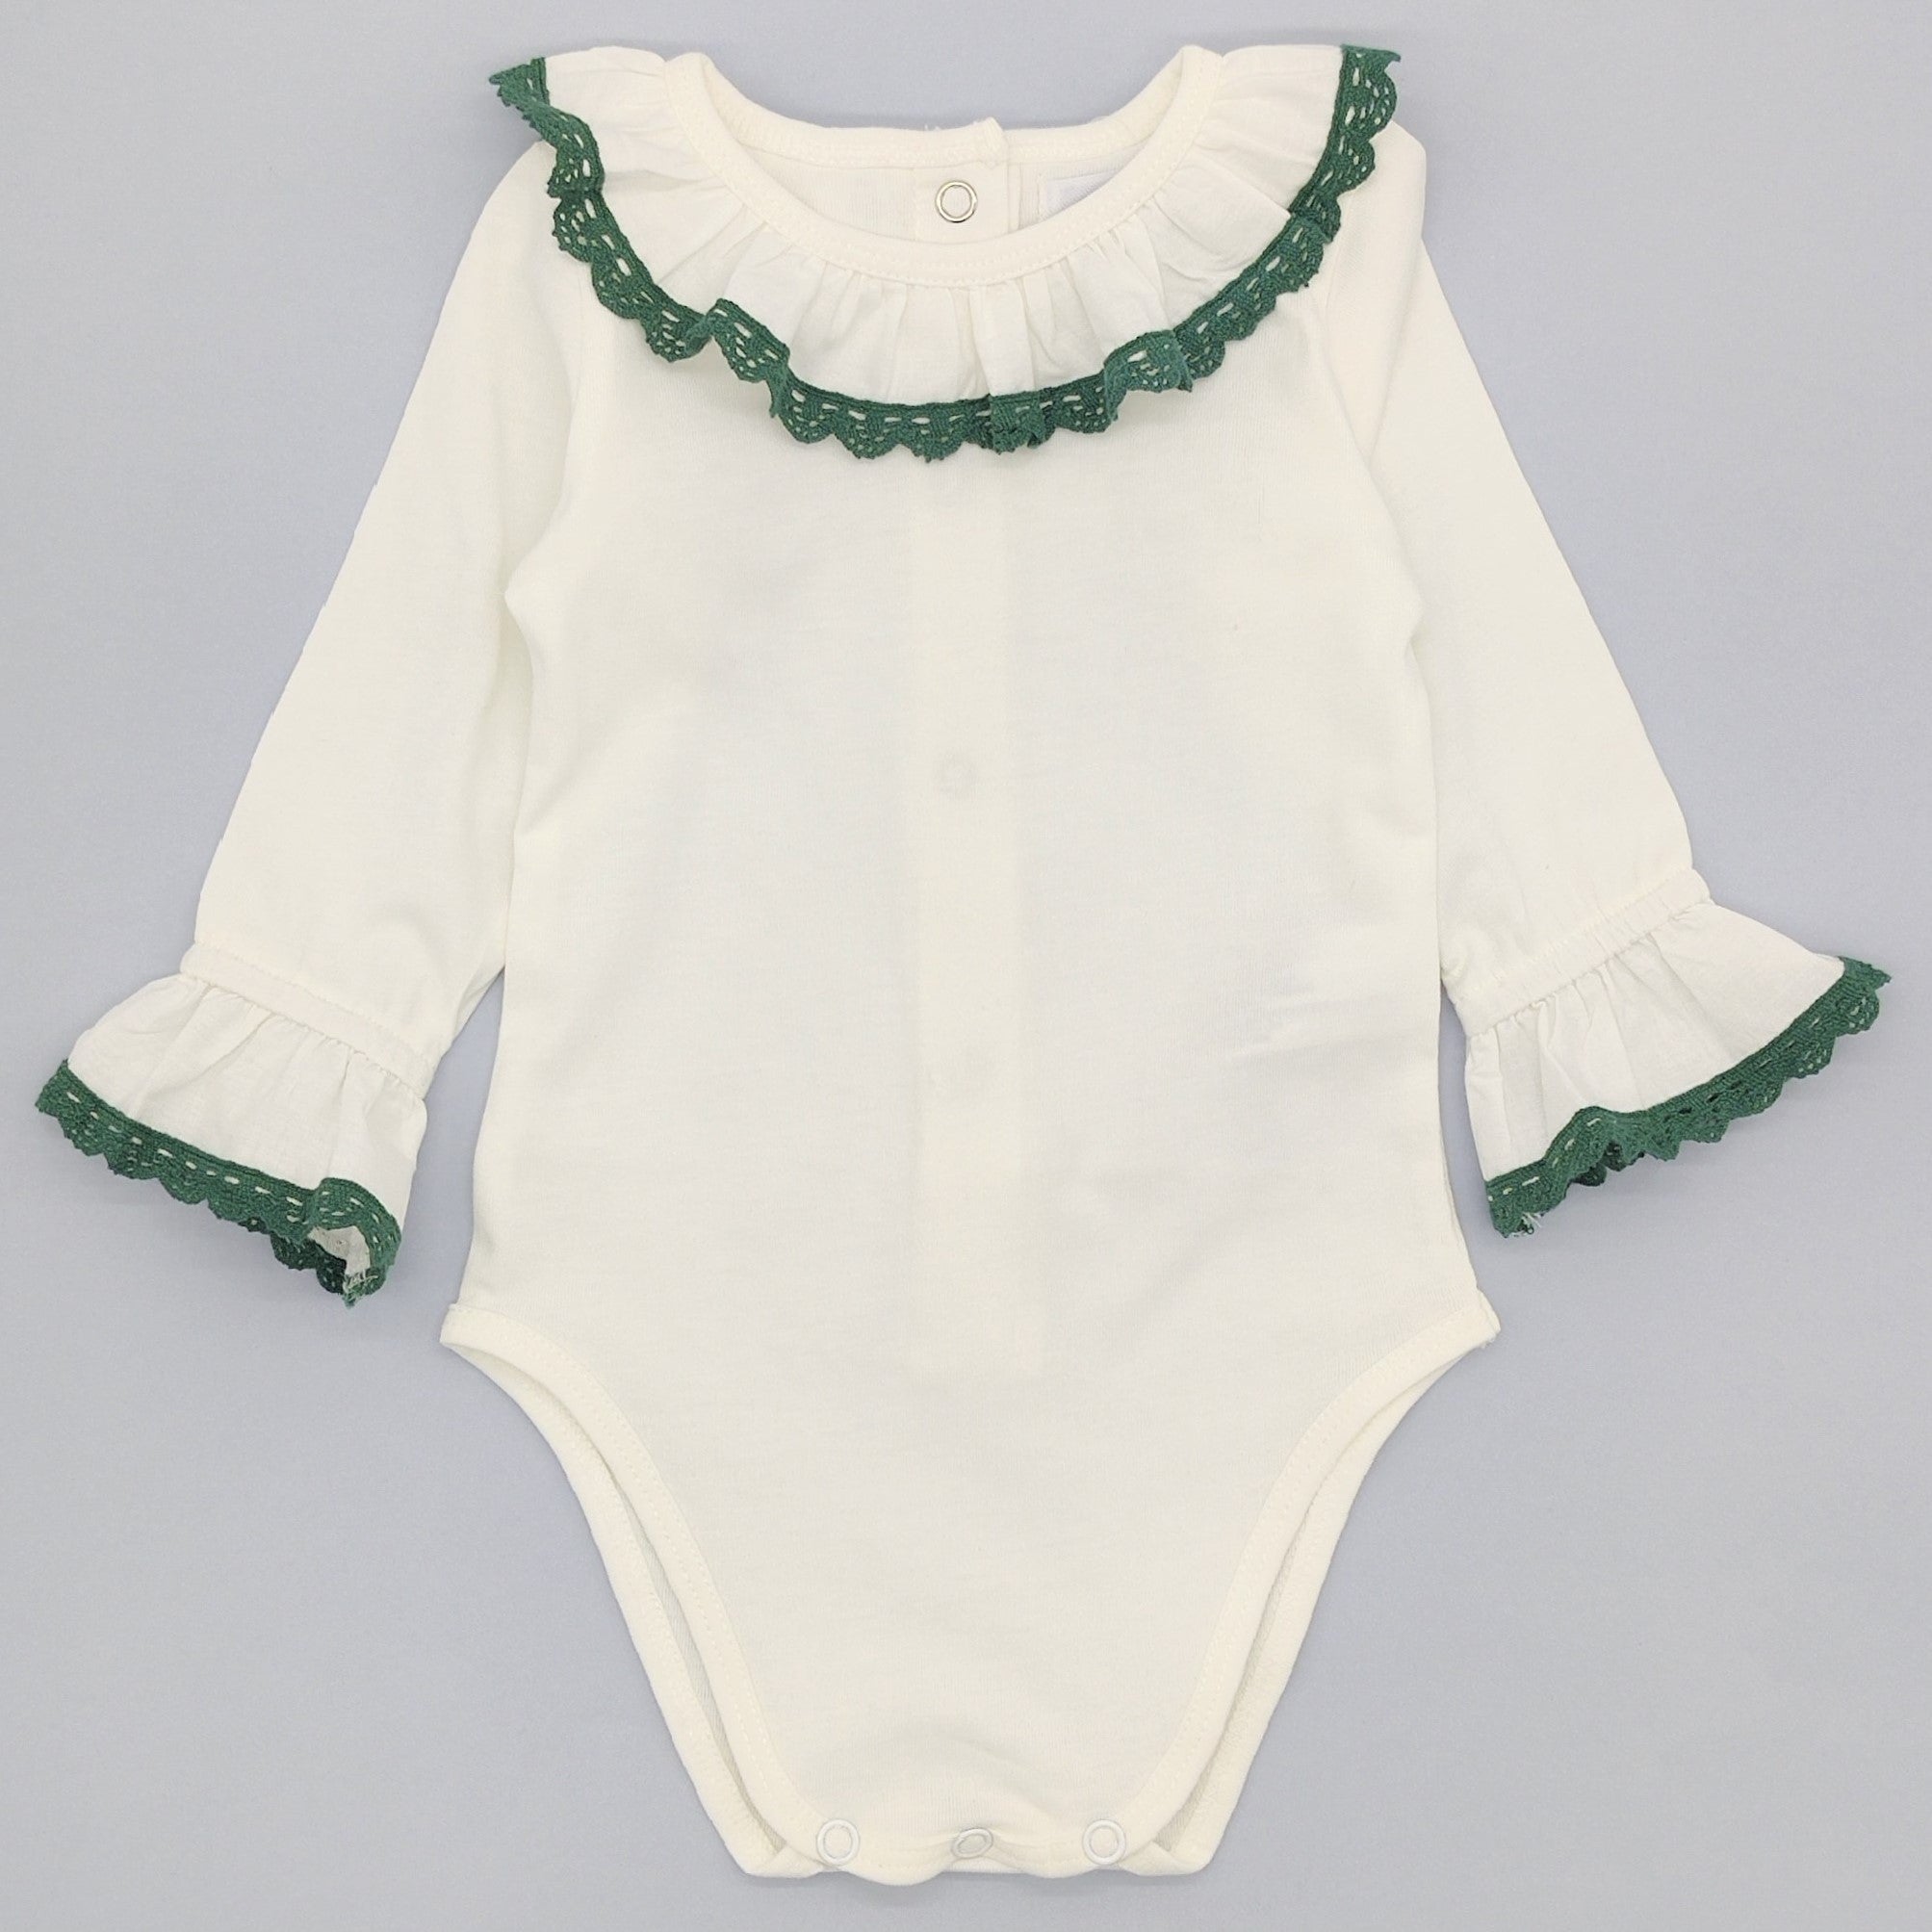 White Cotton Bodysuit with Green Lace